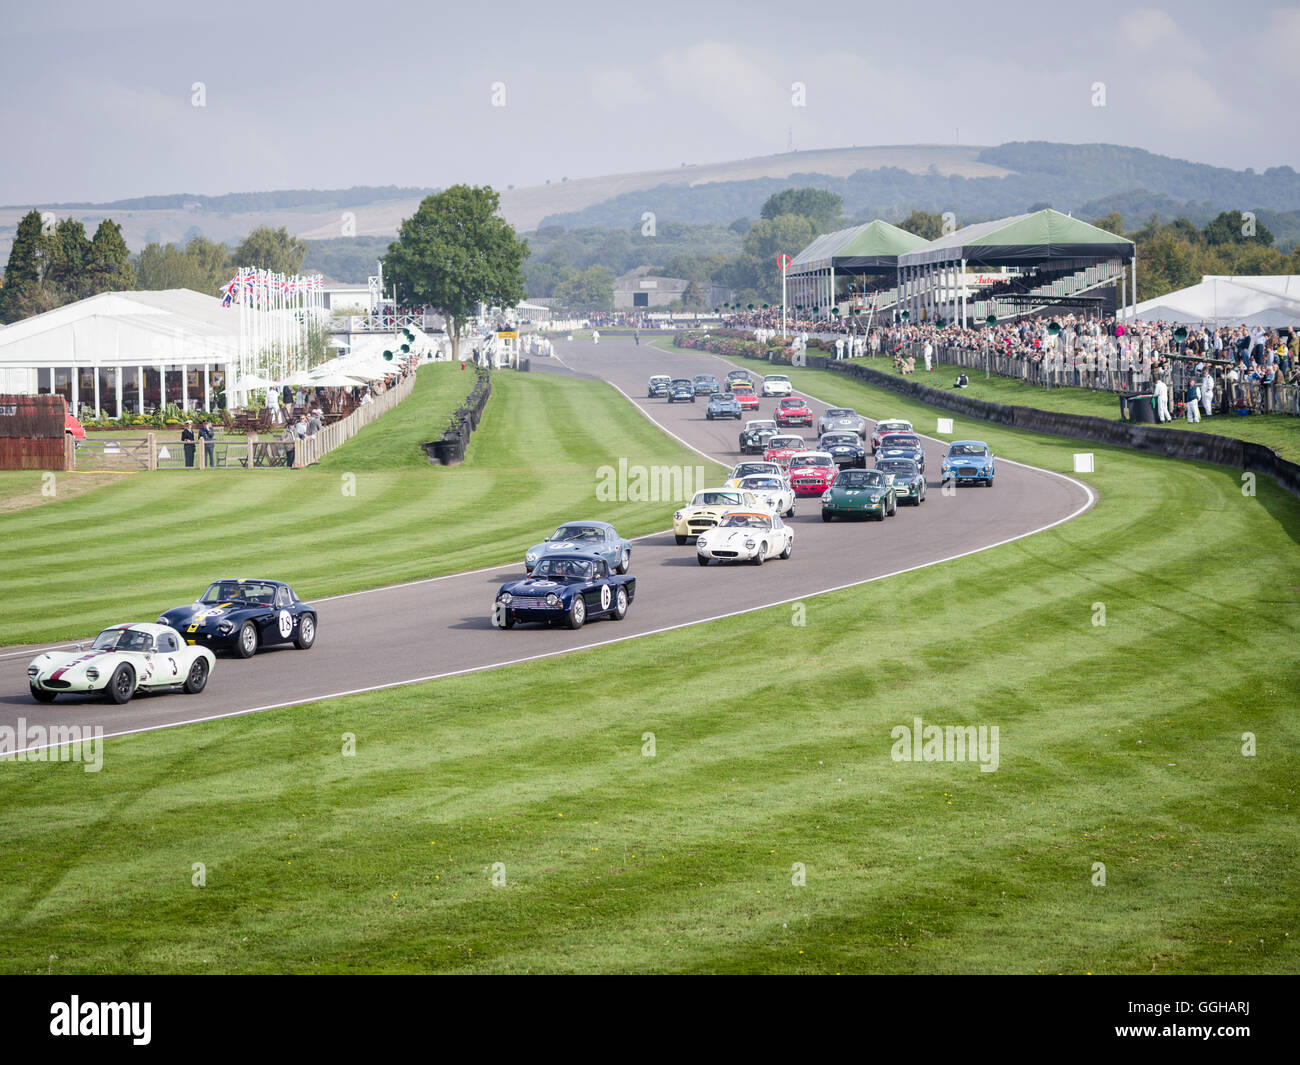 Trofeo Fordwater, Goodwood 2014, Racing Sport, Classic Car, Goodwood, Chichester, Sussex, Inghilterra, Gran Bretagna Foto Stock